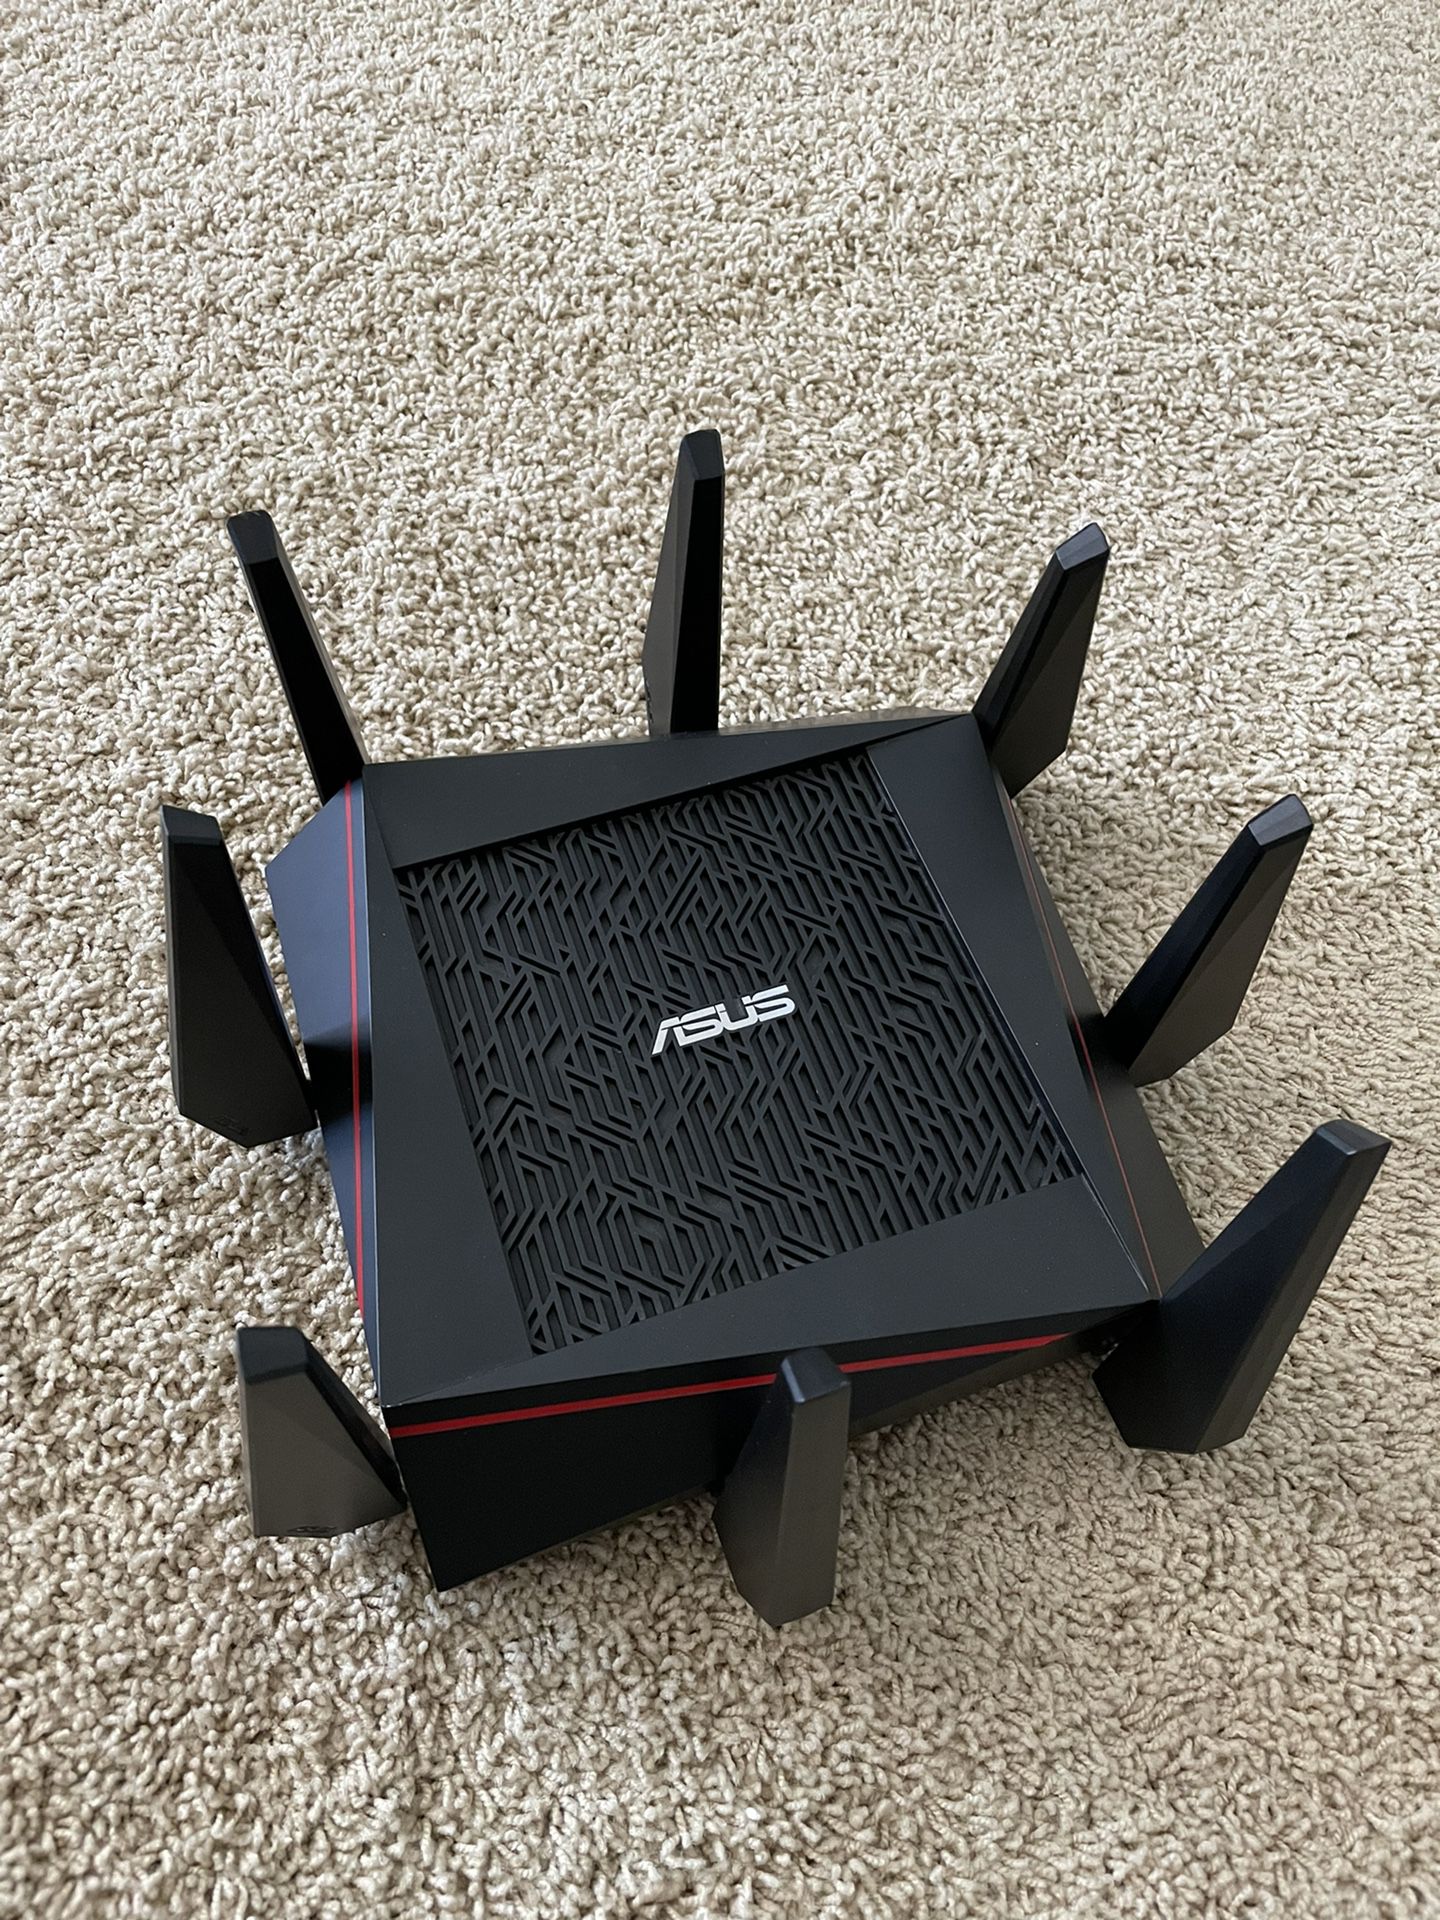 ASUS RT-AC5300 Tri-Band AC Wireless Router